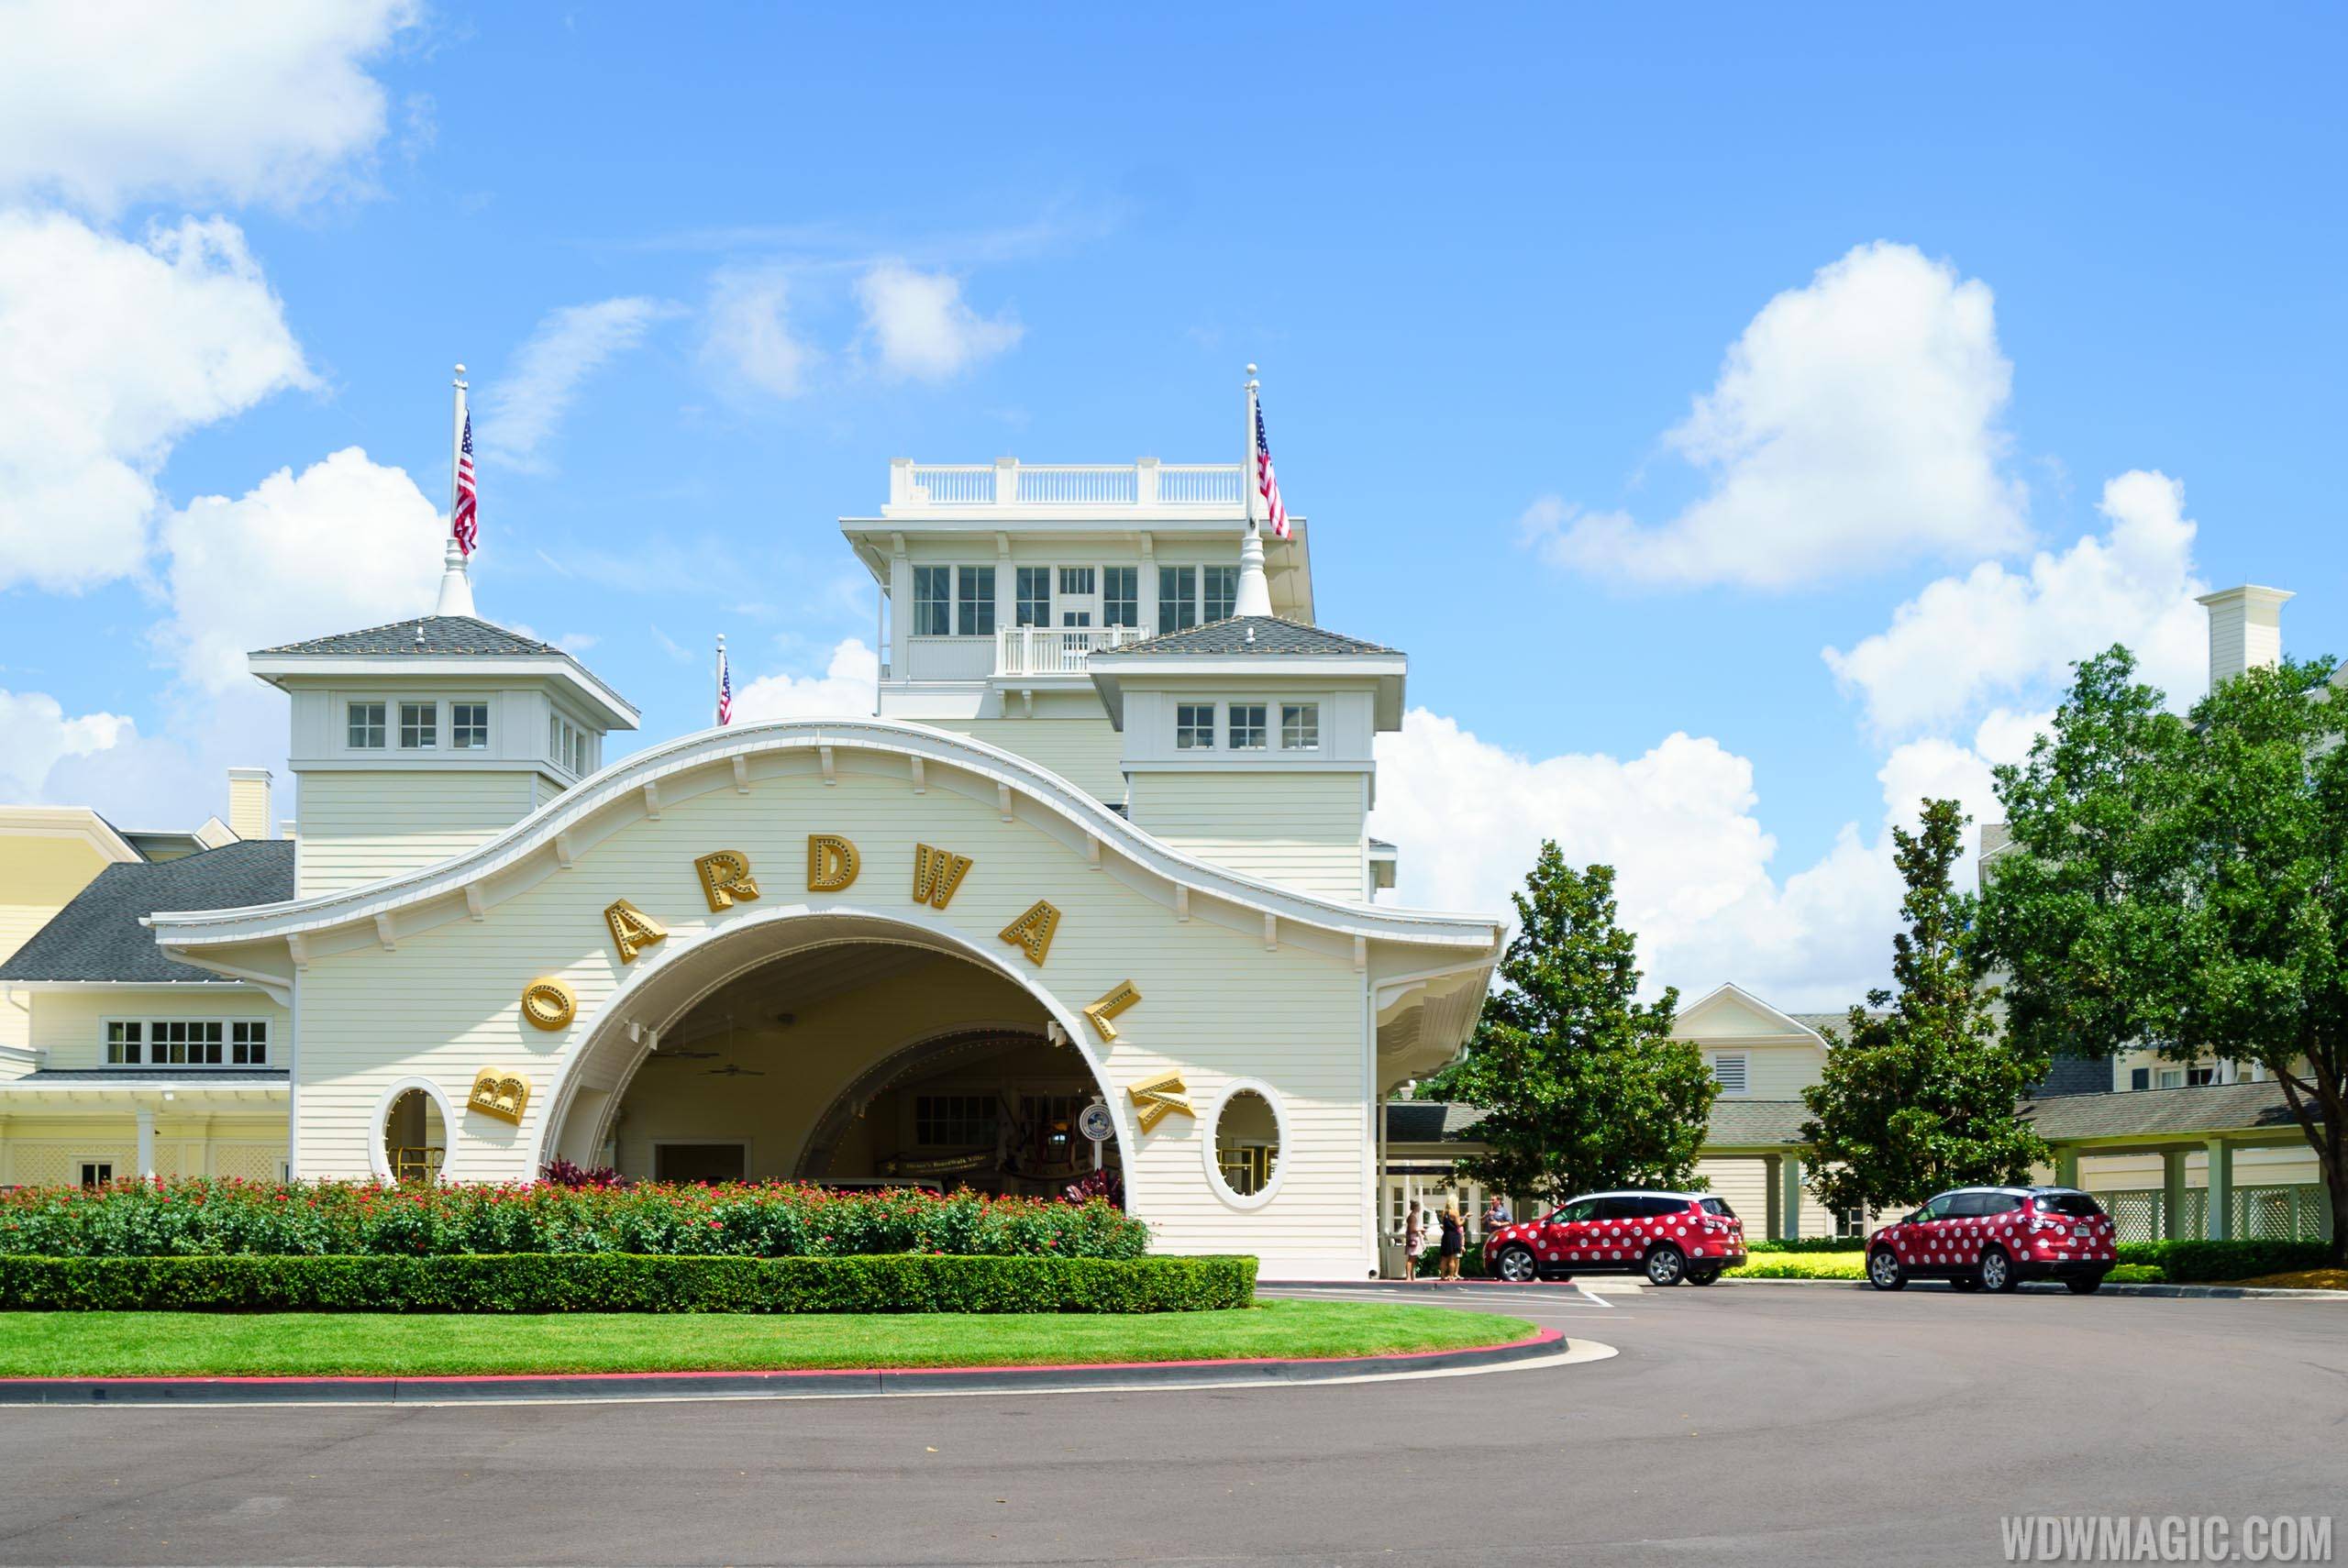 Baggage Airline Guest Services provide remote airline check-in and valet services at many hotels in the Lake Buena Vista area